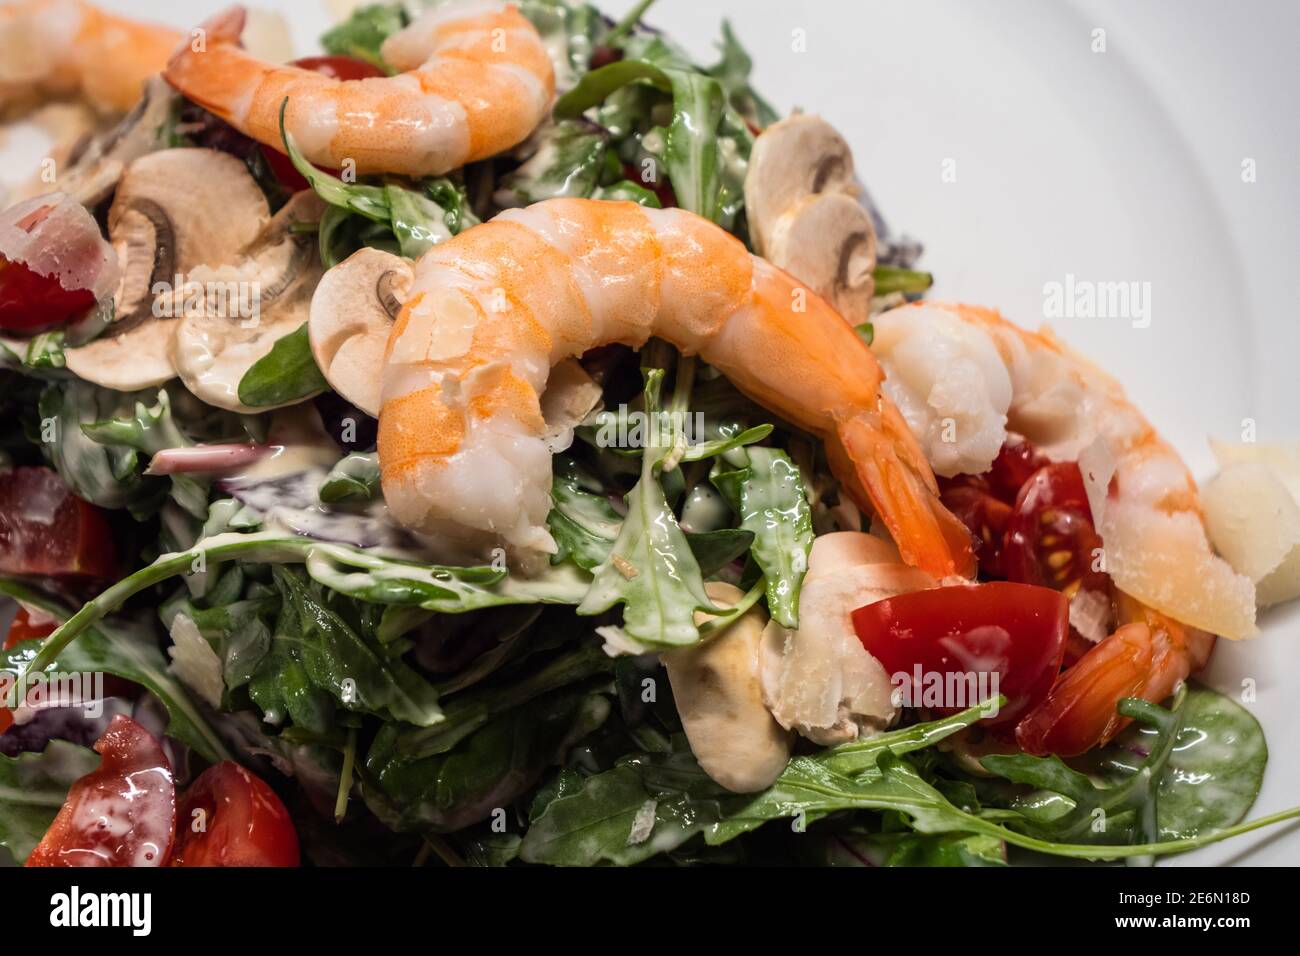 Arugula or Rocket Salad with Prawns or Shrimps, Tomato, Button Mushrooms, Served on a White Plate Stock Photo